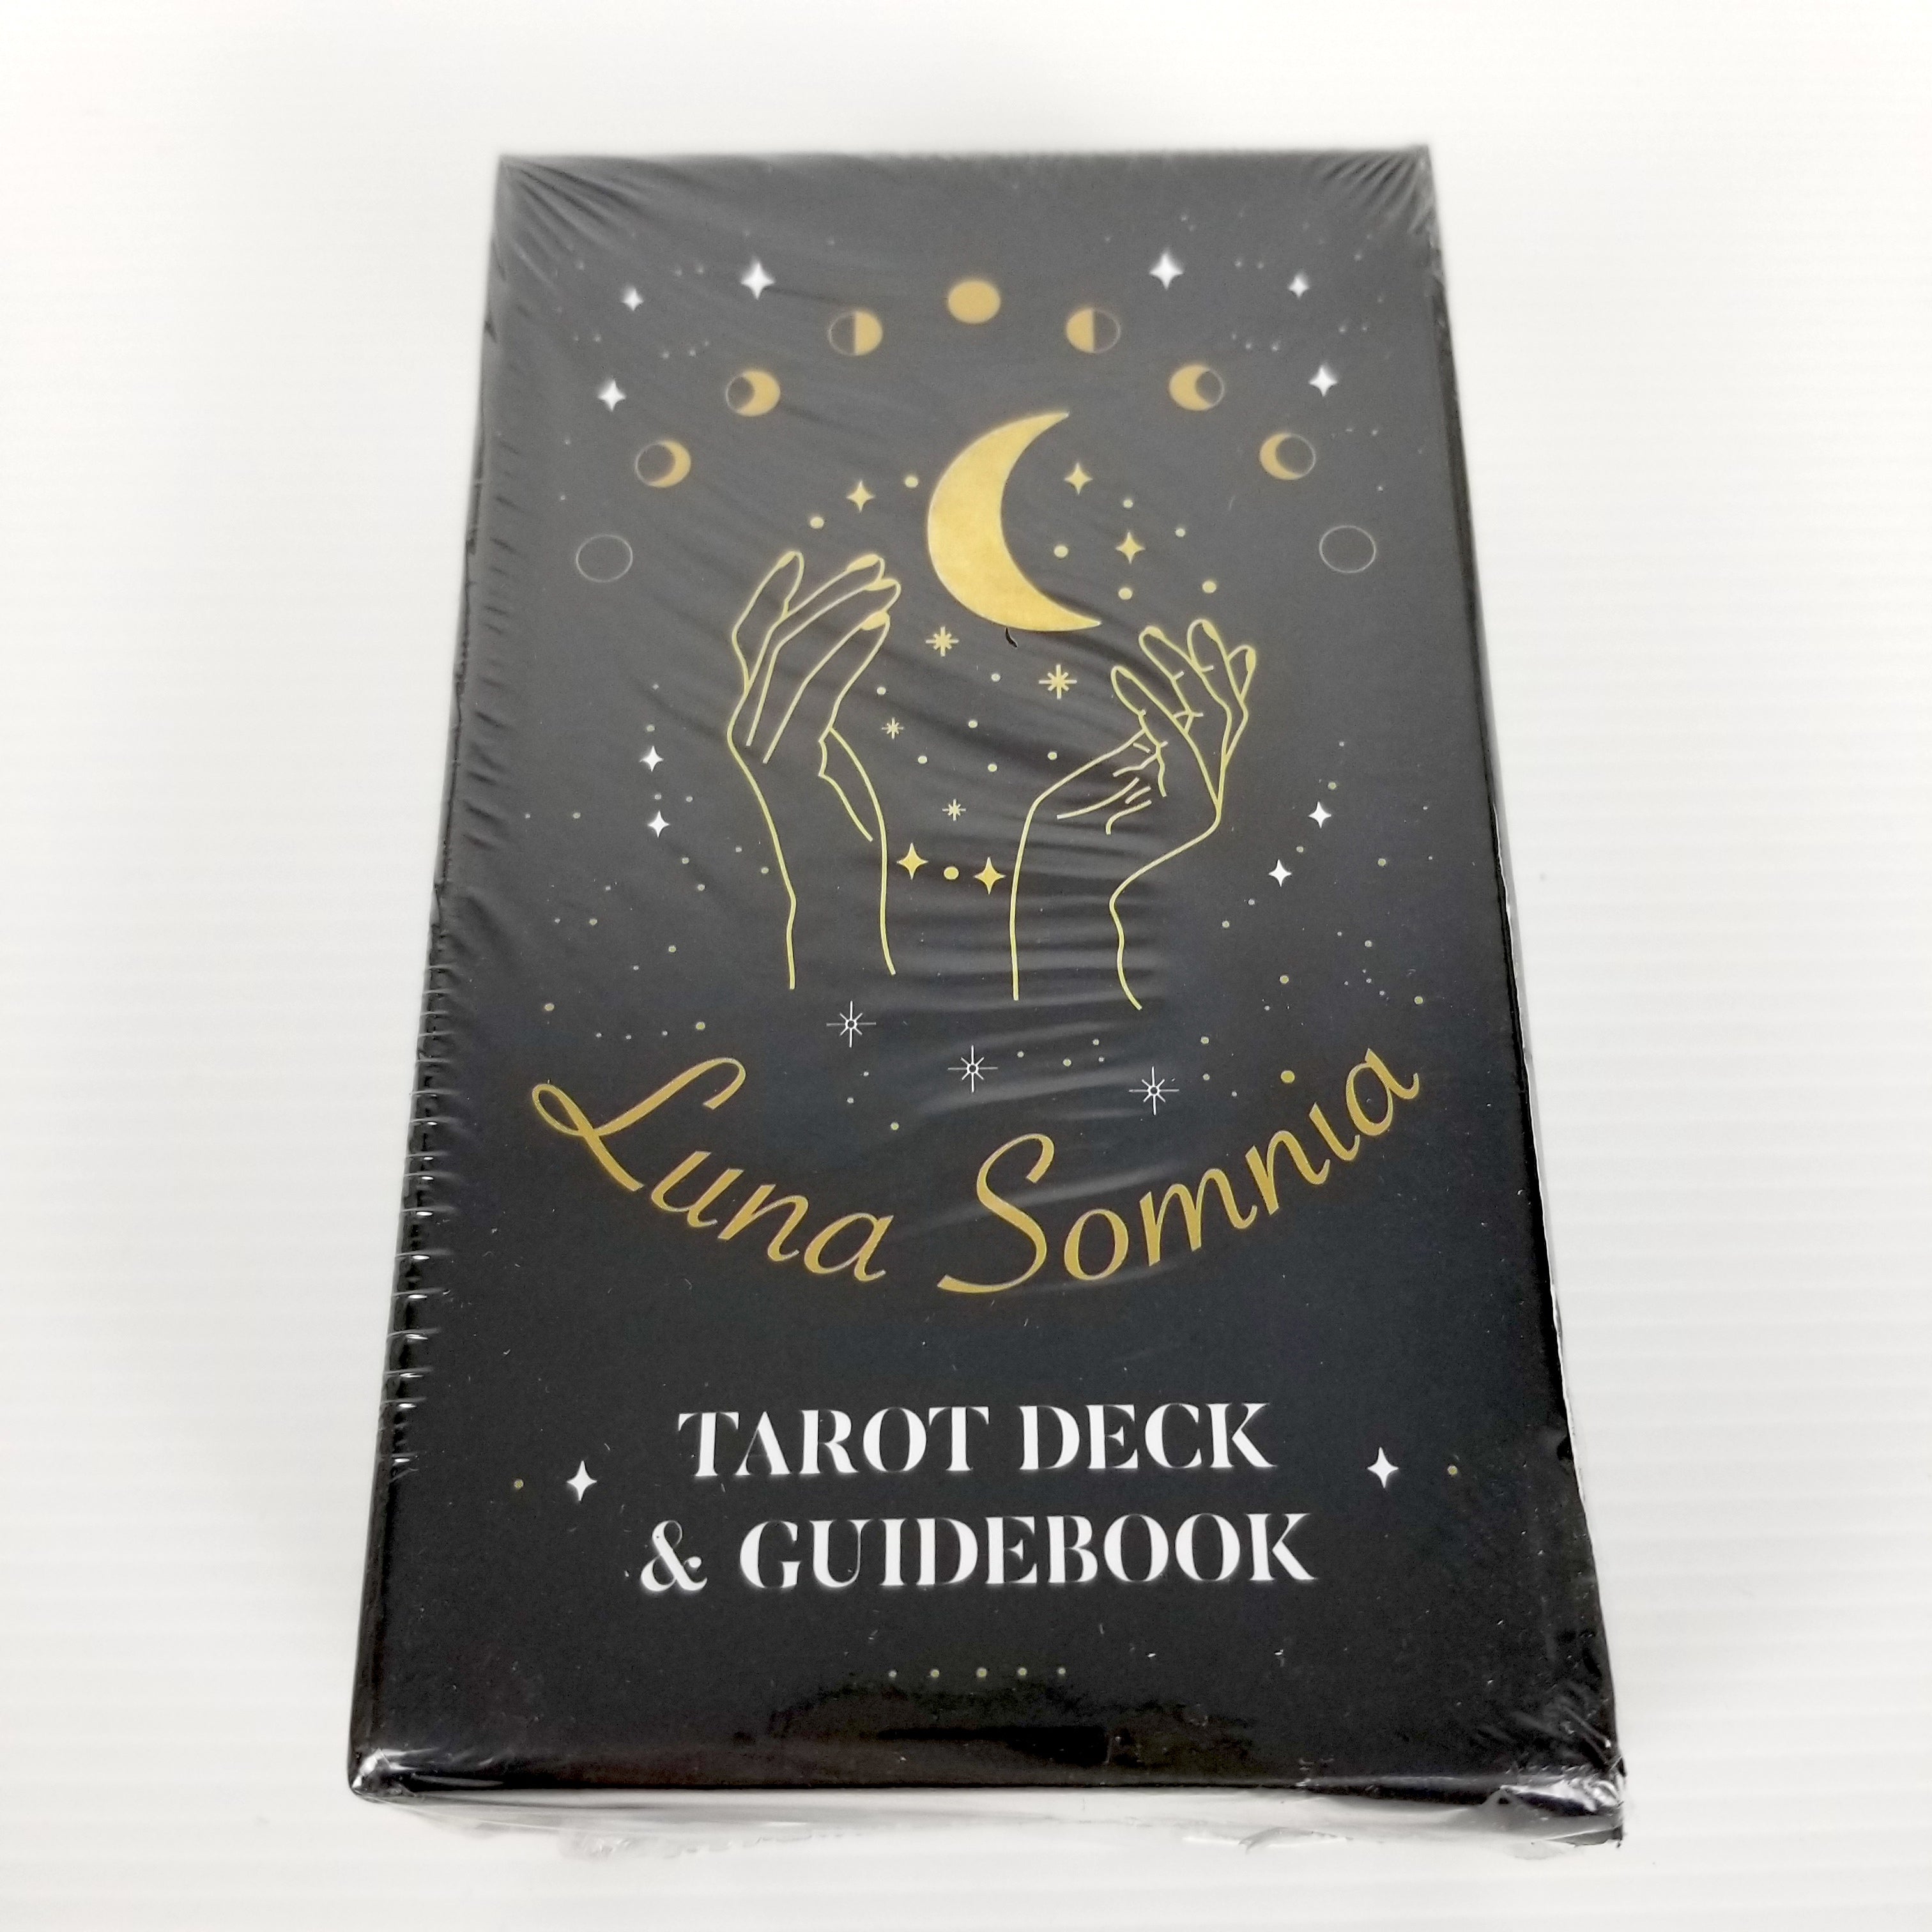 Luna Somnia Tarot Deck with Guidebook & Box - 78 Cards Complete Full Deck - Moon Dreams Starry Celestial Astrology Witchy Black Gold Divination Tool (2nd)